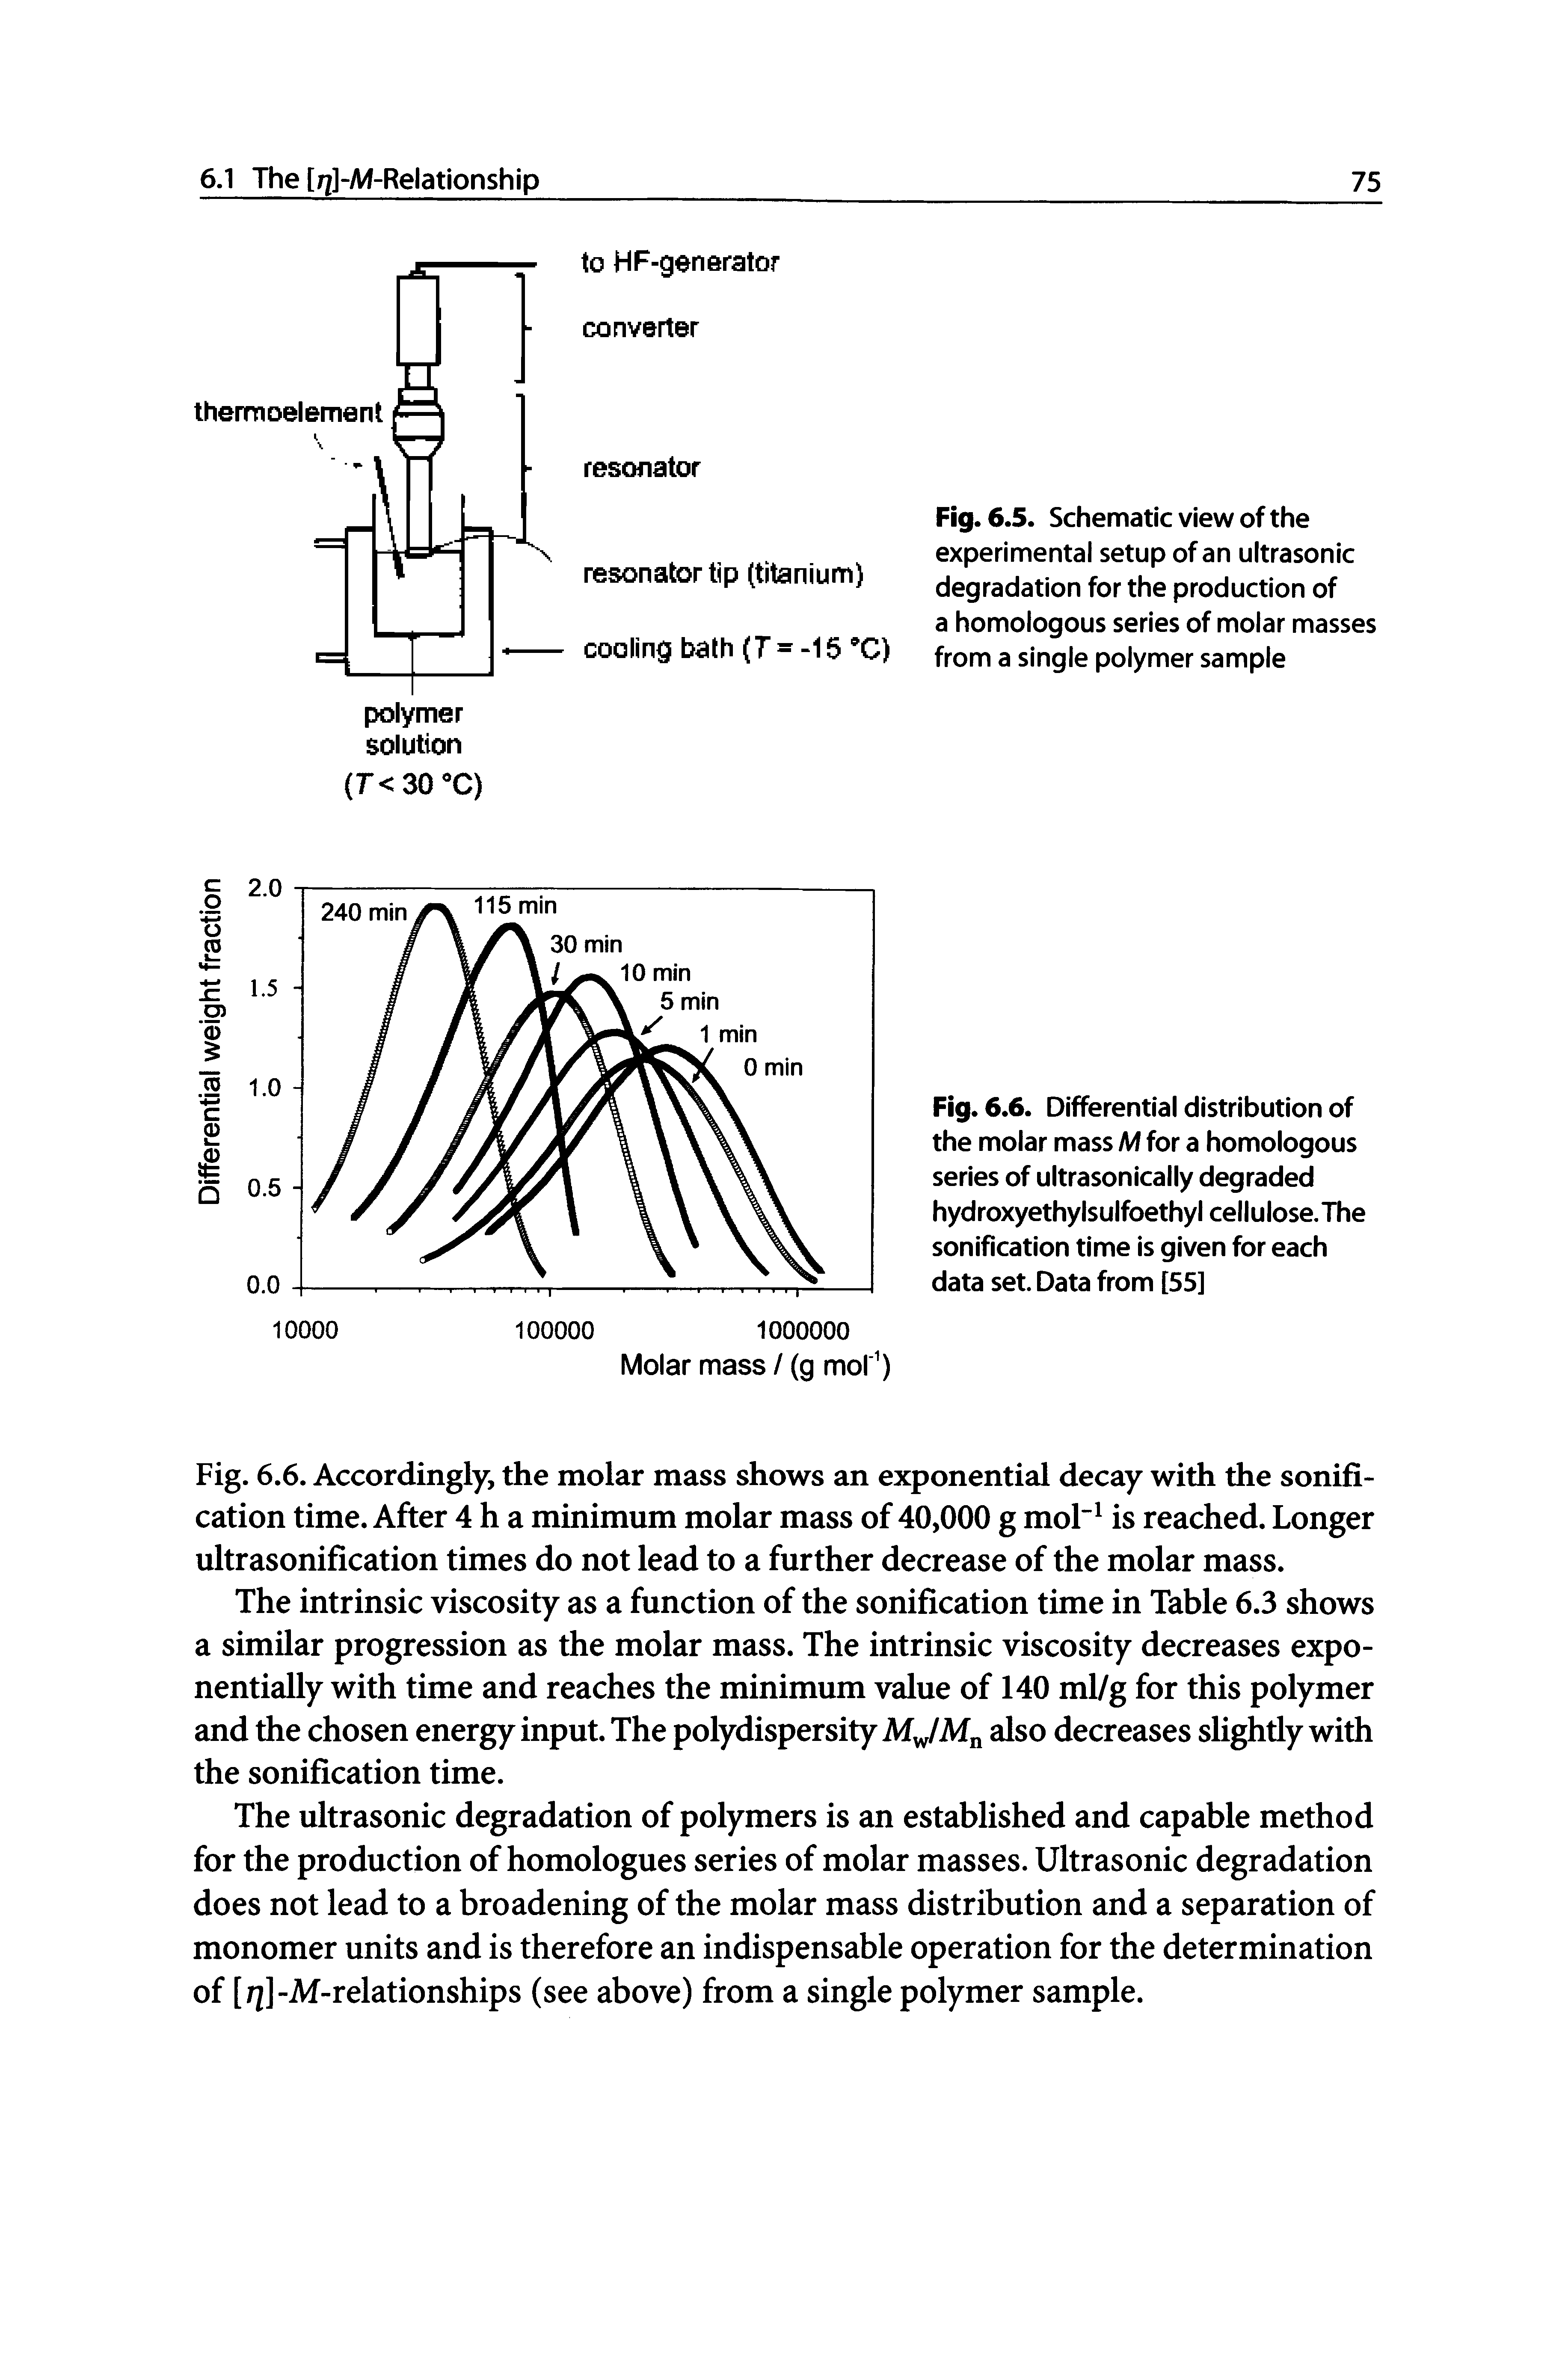 Fig. 6.6. Accordingly, the molar mass shows an exponential decay with the sonification time. After 4 h a minimum molar mass of 40,000 g mol" is reached. Longer ultrasonification times do not lead to a further decrease of the molar mass.